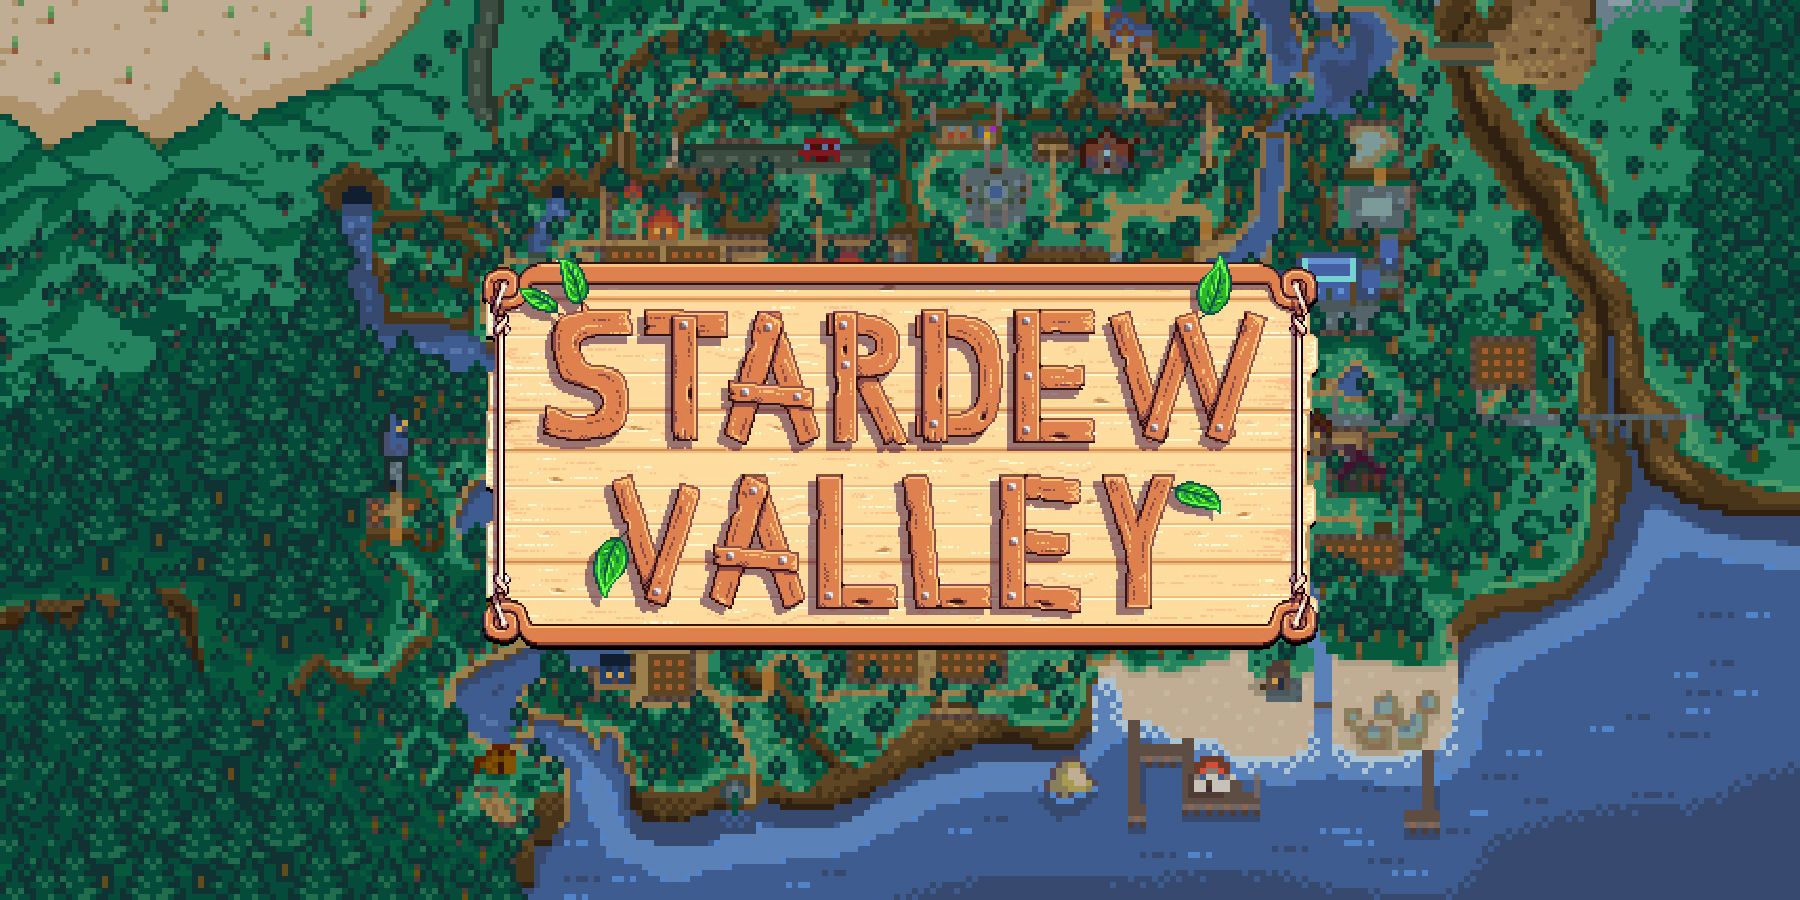 stardew valley spa location underutilized missed opportunity players want update